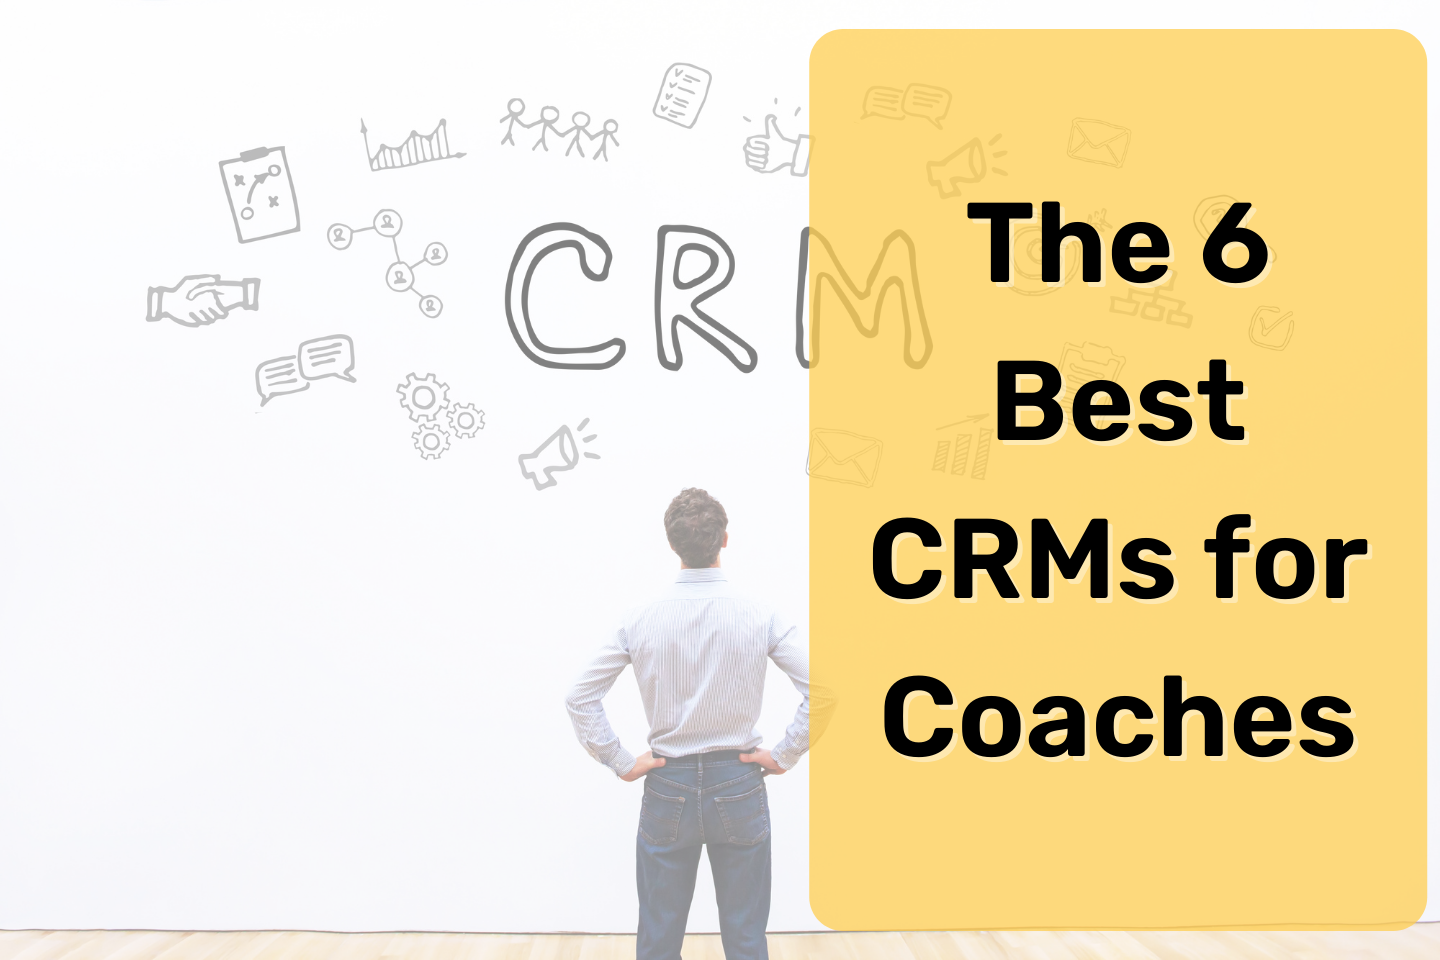 crm for coaches